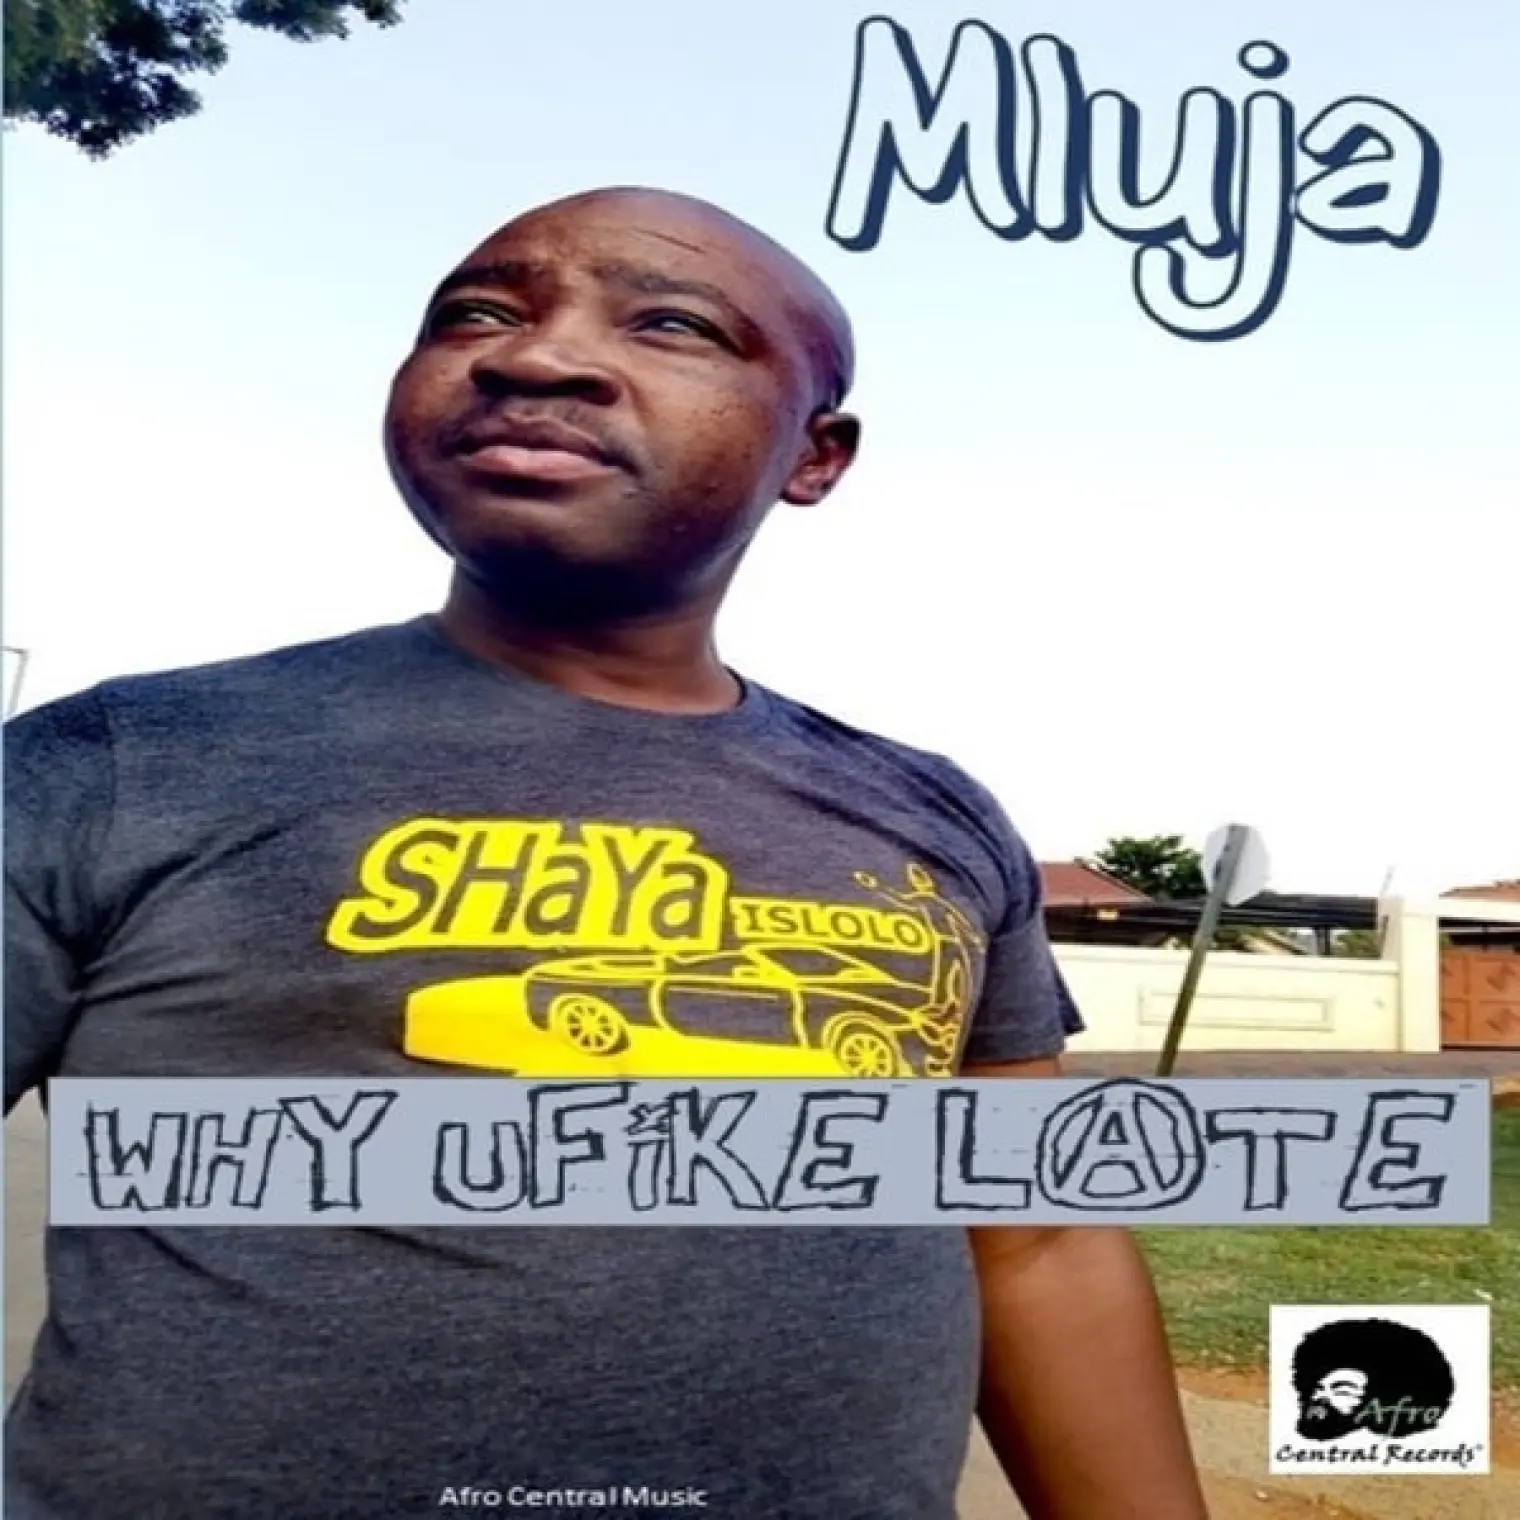 Why Ufike Late (Afro Central Mix) -  Mluja 